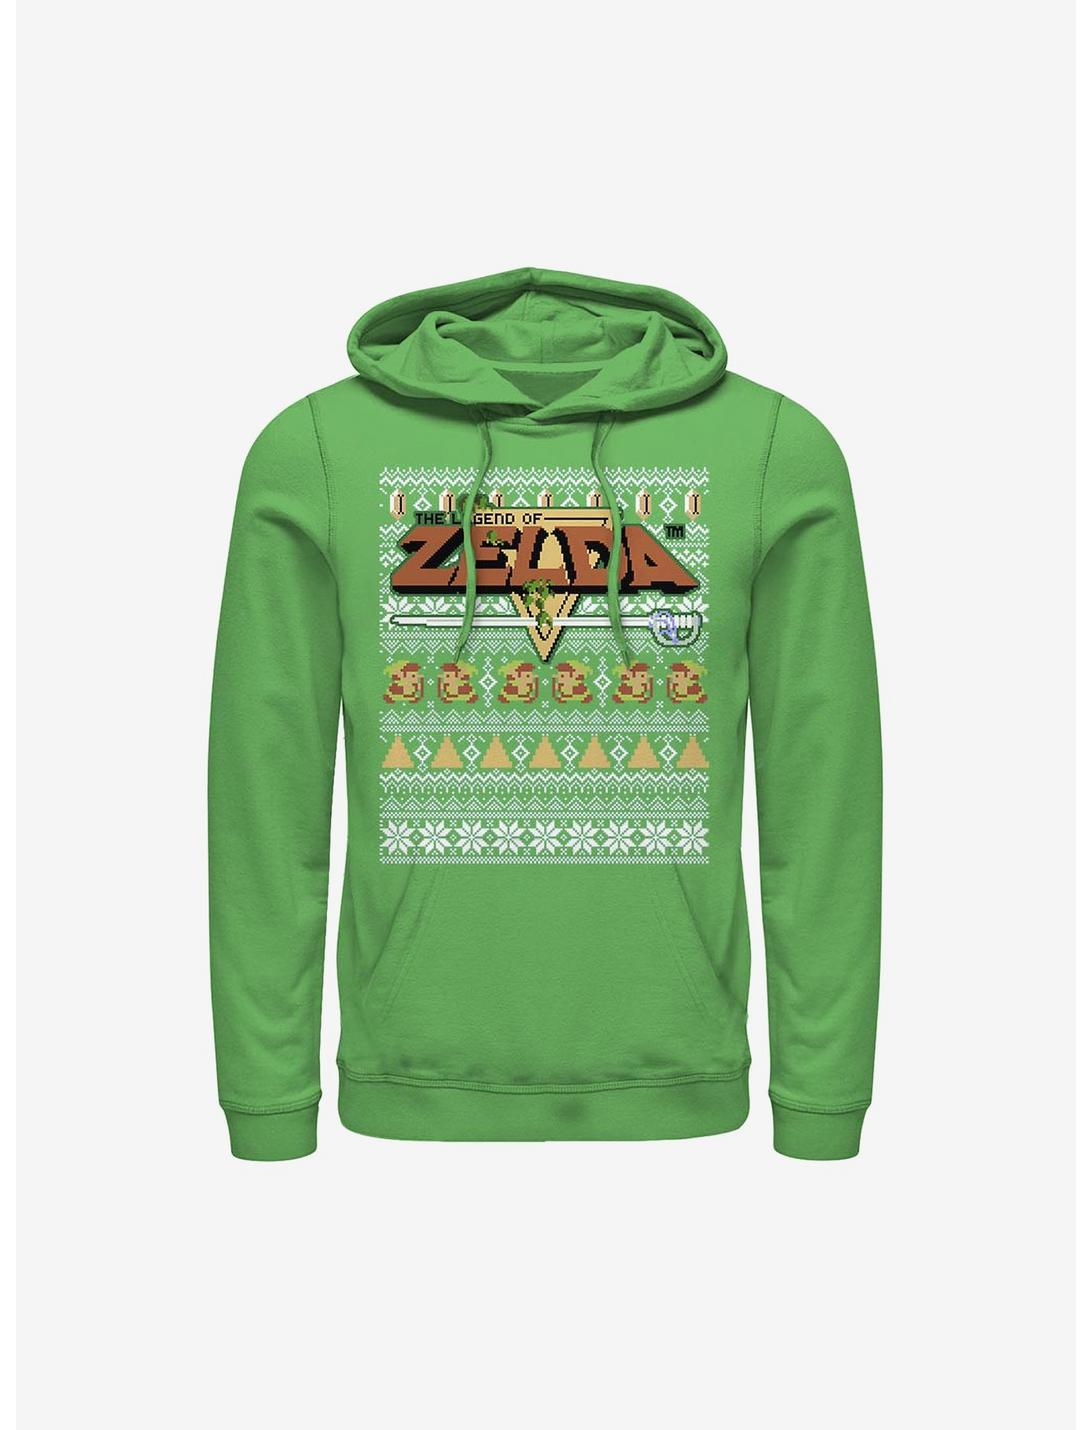 Nintendo The Legend Of Zelda Right Forces Ugly Christmas Sweater Hoodie, KELLY, hi-res